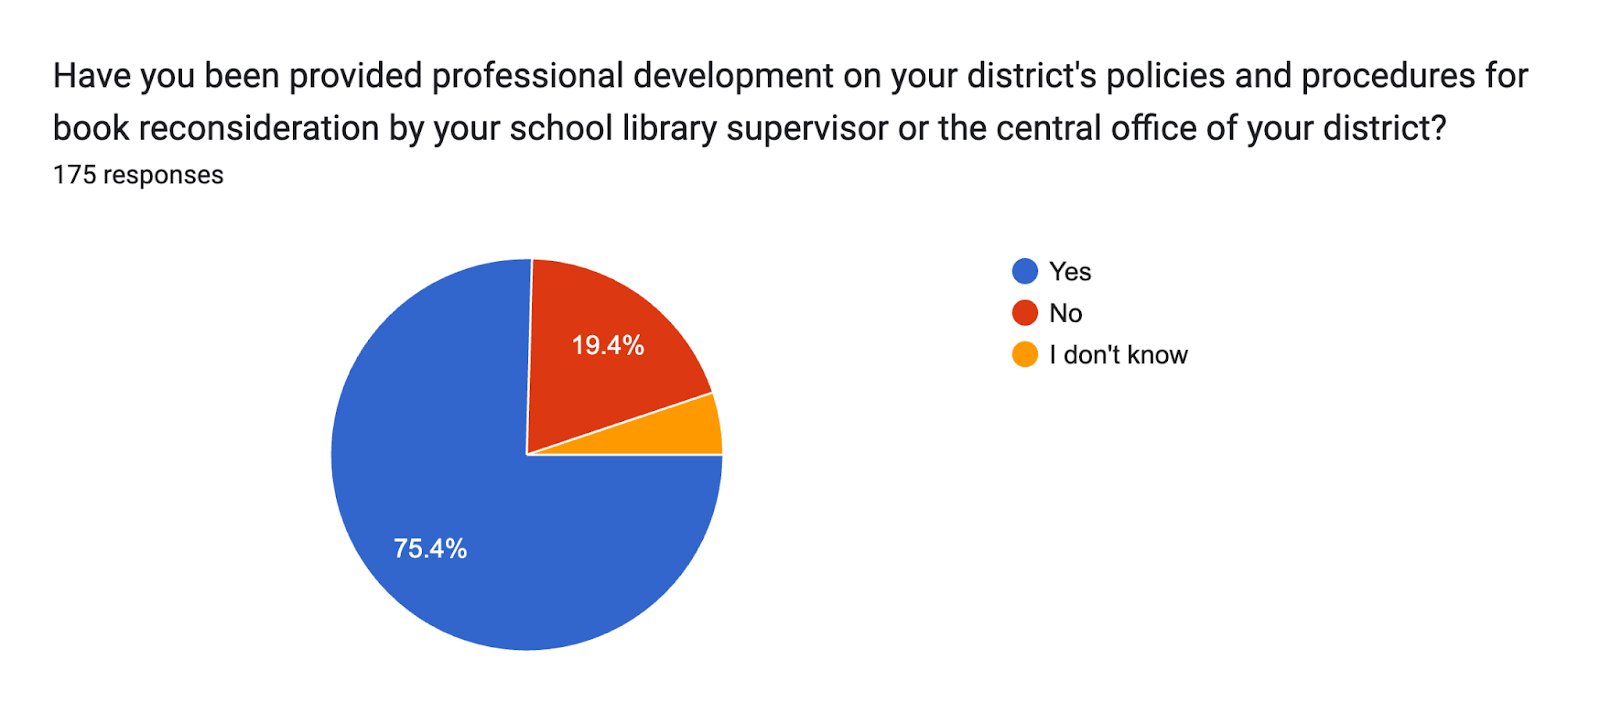 Forms response chart. Question title: Have you been provided professional development on your district's policies and procedures for book reconsideration by your school library supervisor or the central office of your district?. Number of responses: 175 responses.